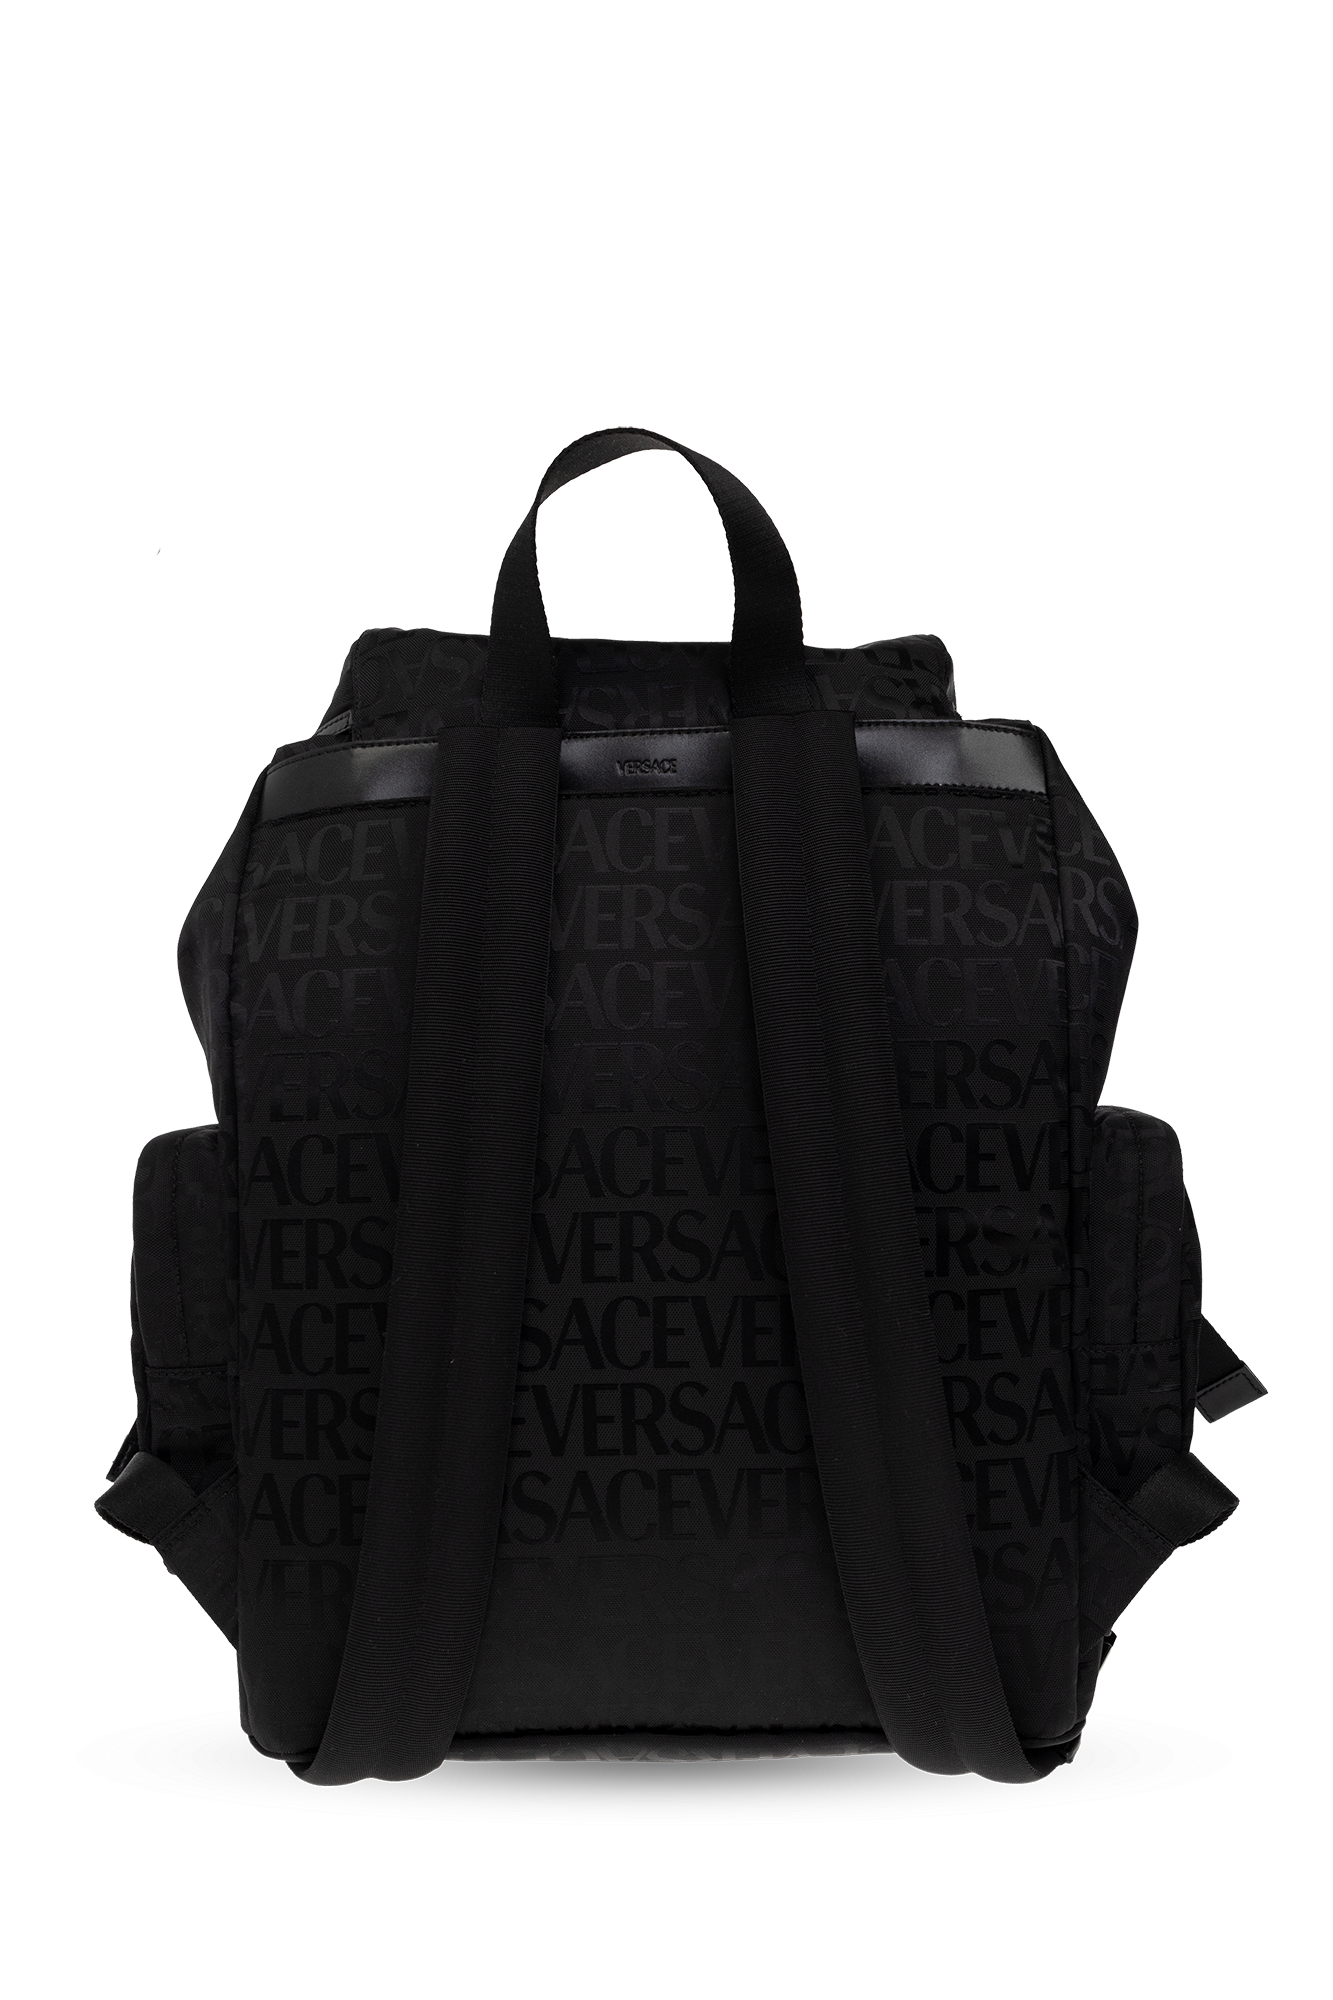 Versace Backpack with logo